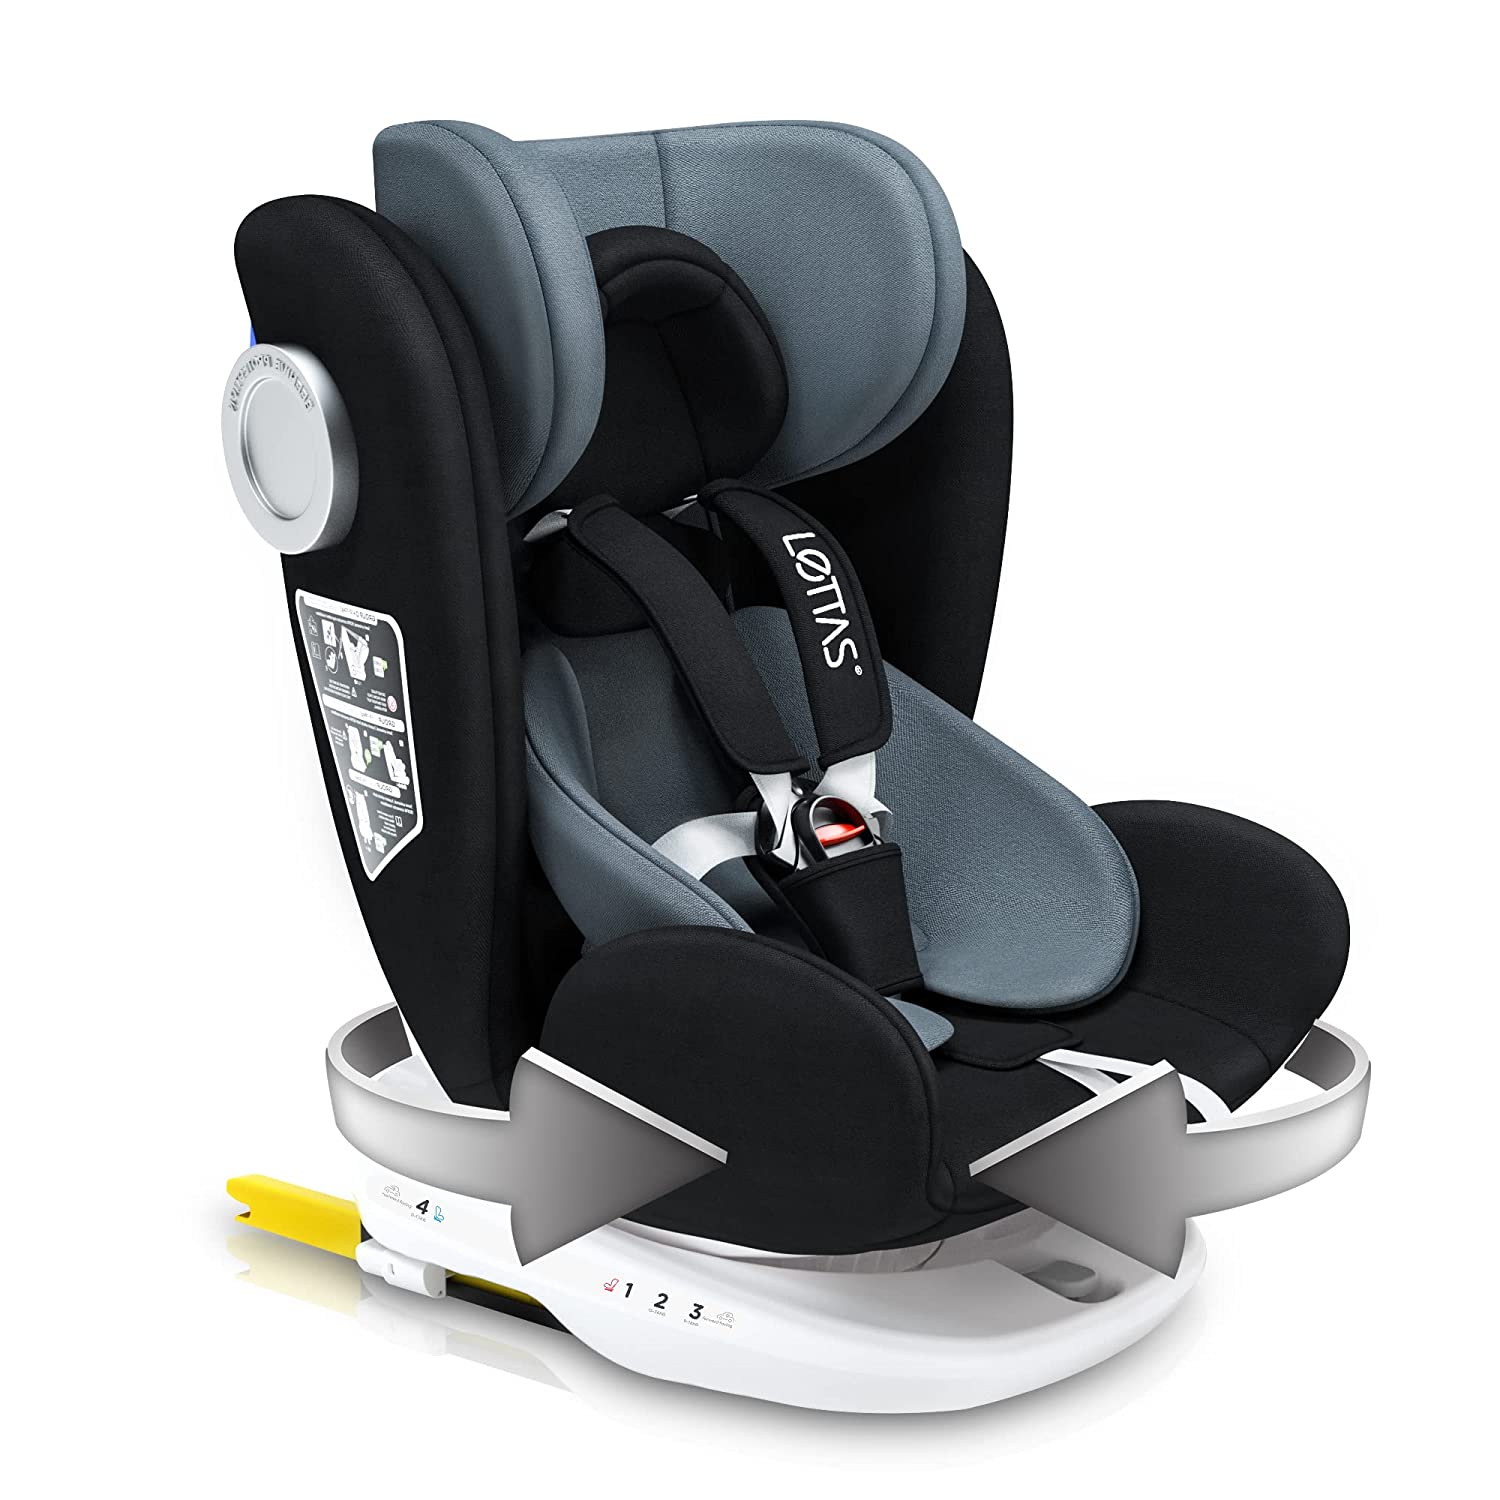 LETTAS 360 Degree Rotatable Baby Child Seat Isofix and Top Tether SIPS Group 0+/1/2/3, 0-12 Years, 0-36 kg, ECE R44/04, ADAC